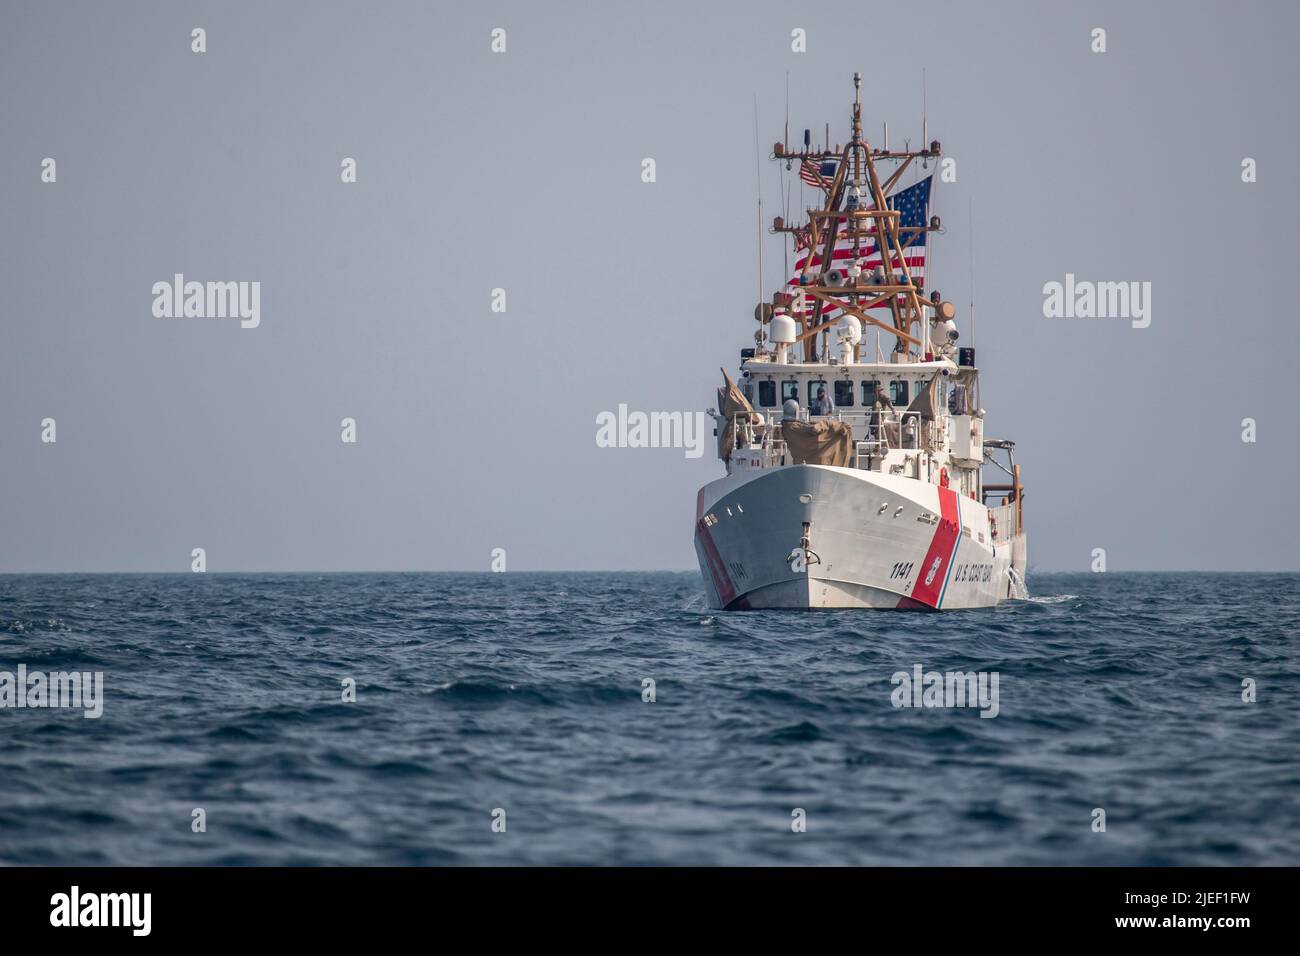 220626-N-NS602-1317 ARABIAN GULF (June 26, 2022) U.S. Coast Guard cutter USCGC Charles Moulthrope (WPC 1141) sails in the Arabian Gulf, June 26. U.S. naval forces regularly operate across the Middle East region to help ensure security and stability. (U.S. Navy photo by Chief Mass Communication Specialist Roland A. Franklin) Stock Photo